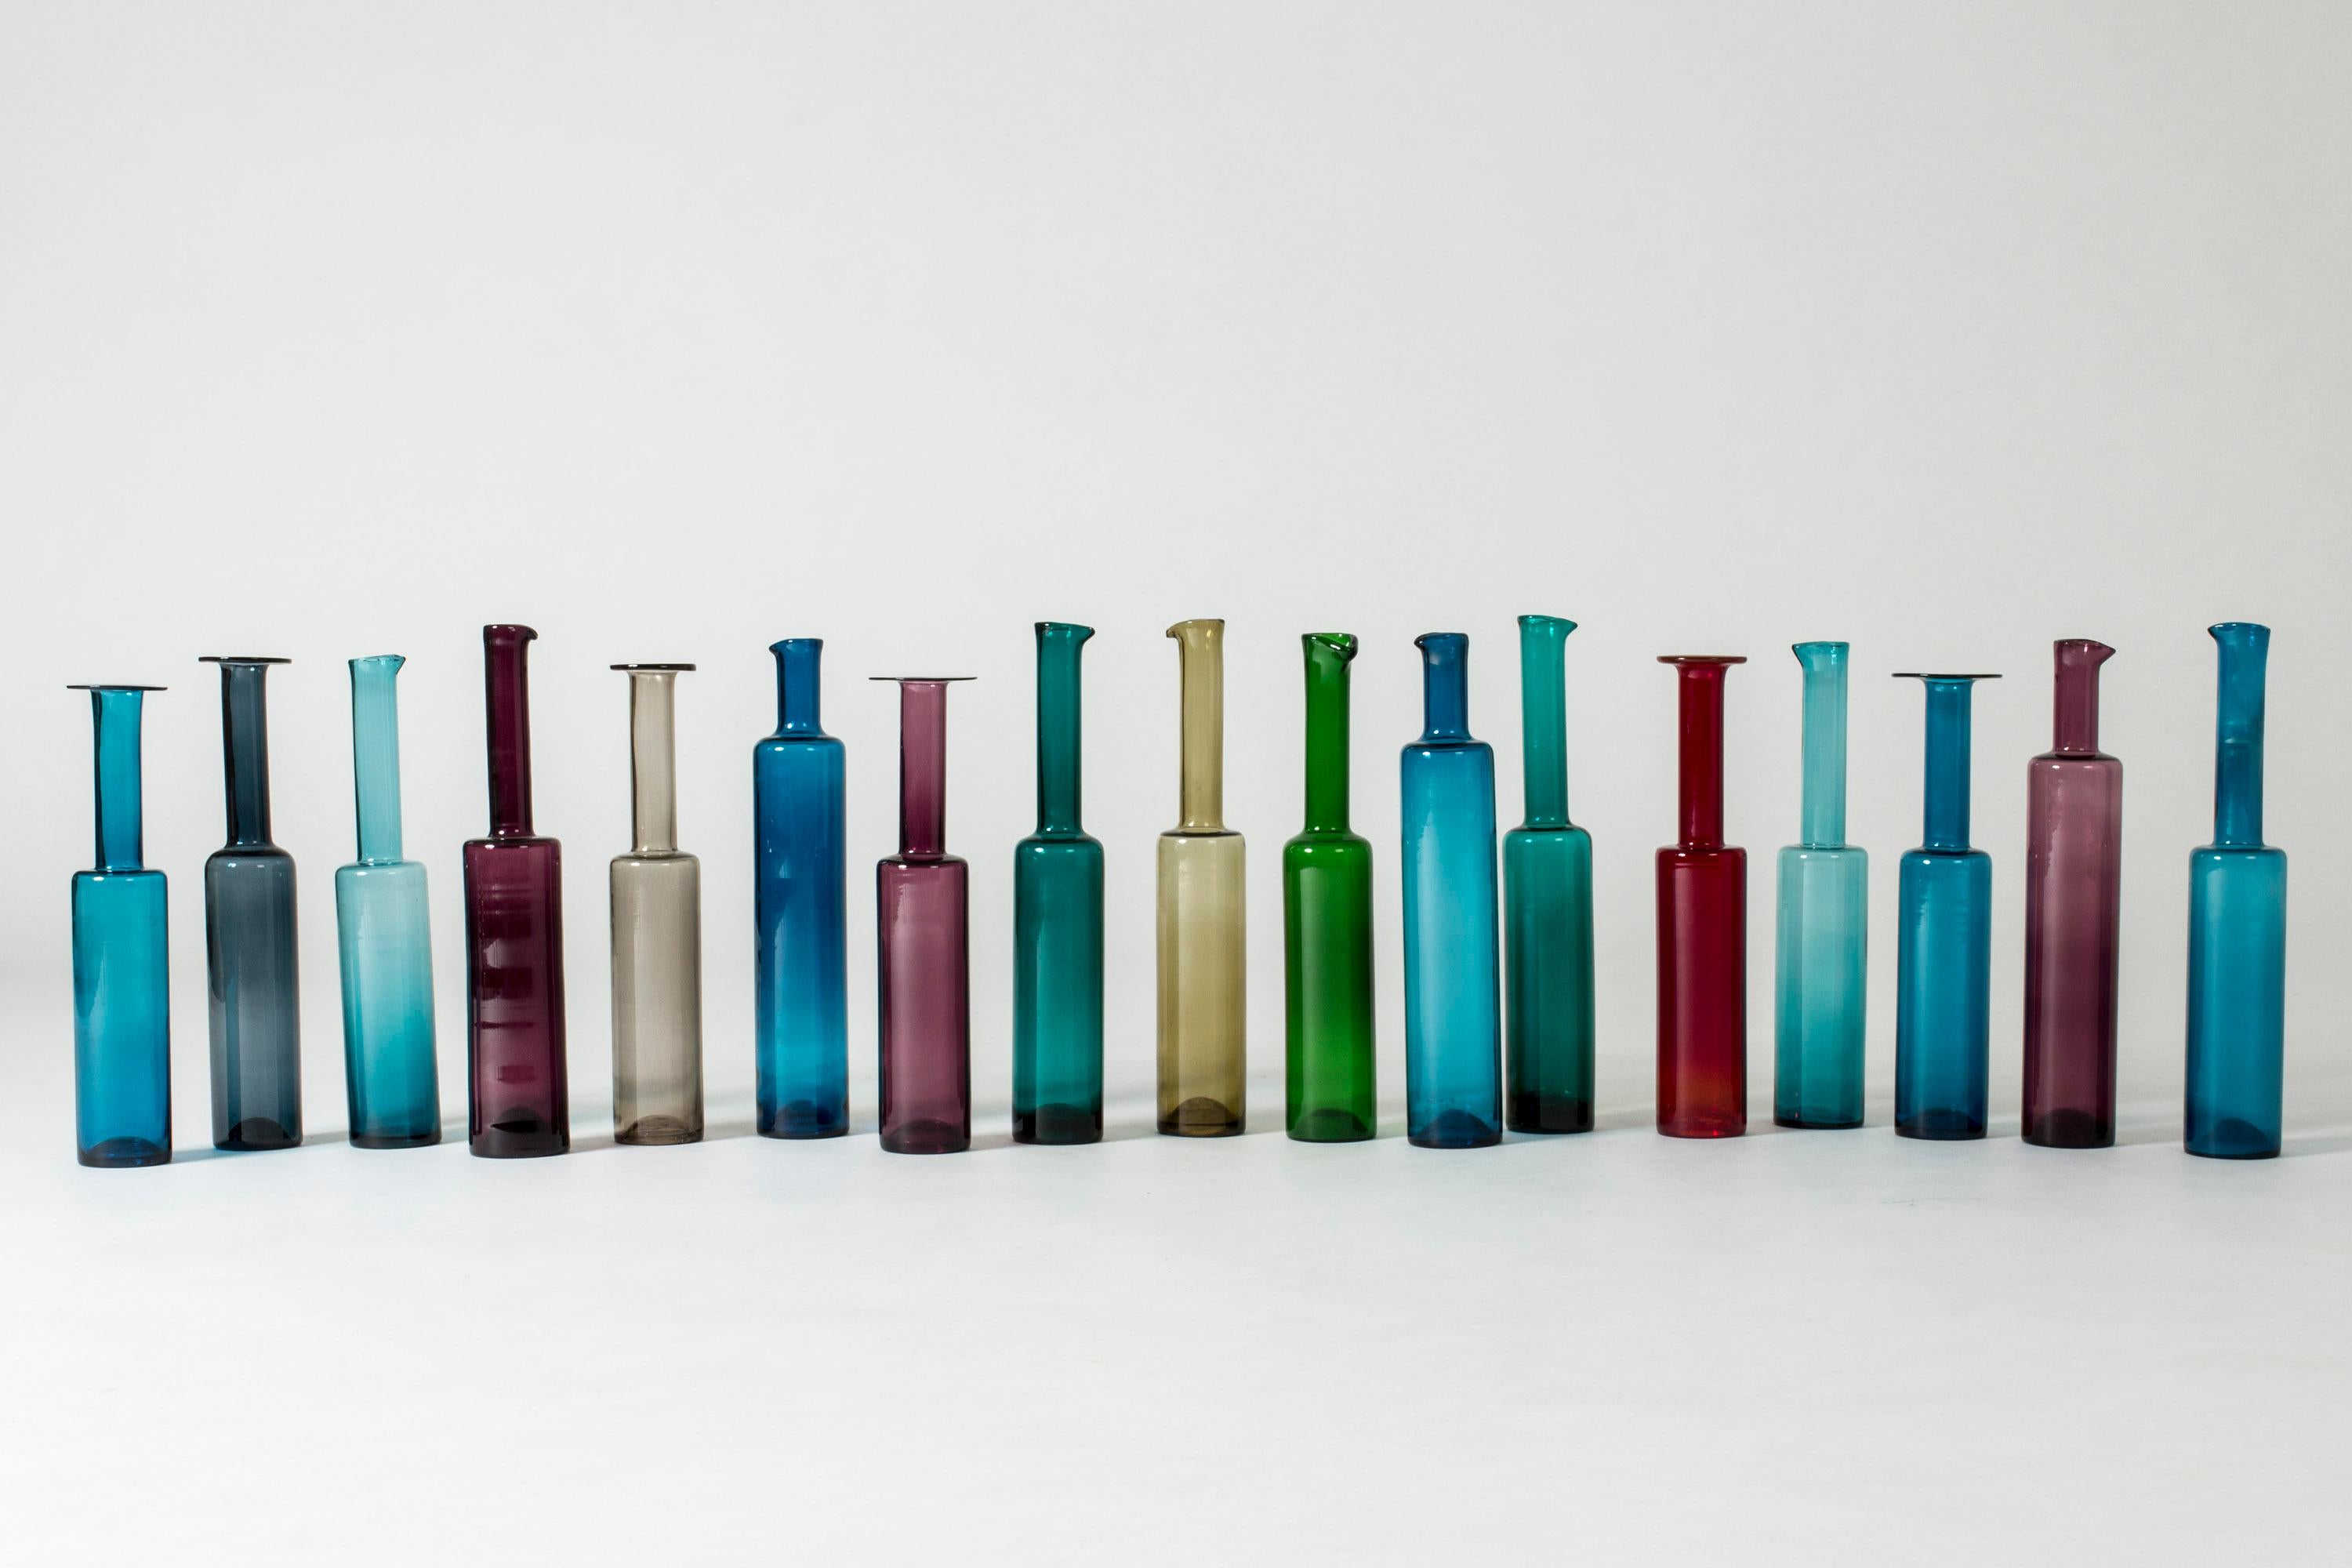 Amazing set of seventeen glass bottles by Nanny Still. Sleek, clean design with beautiful proportions, the simplicity and moderate colors giving them a strong yet tranquil presence. Six of the bottles have round wide brims and eleven have spots at